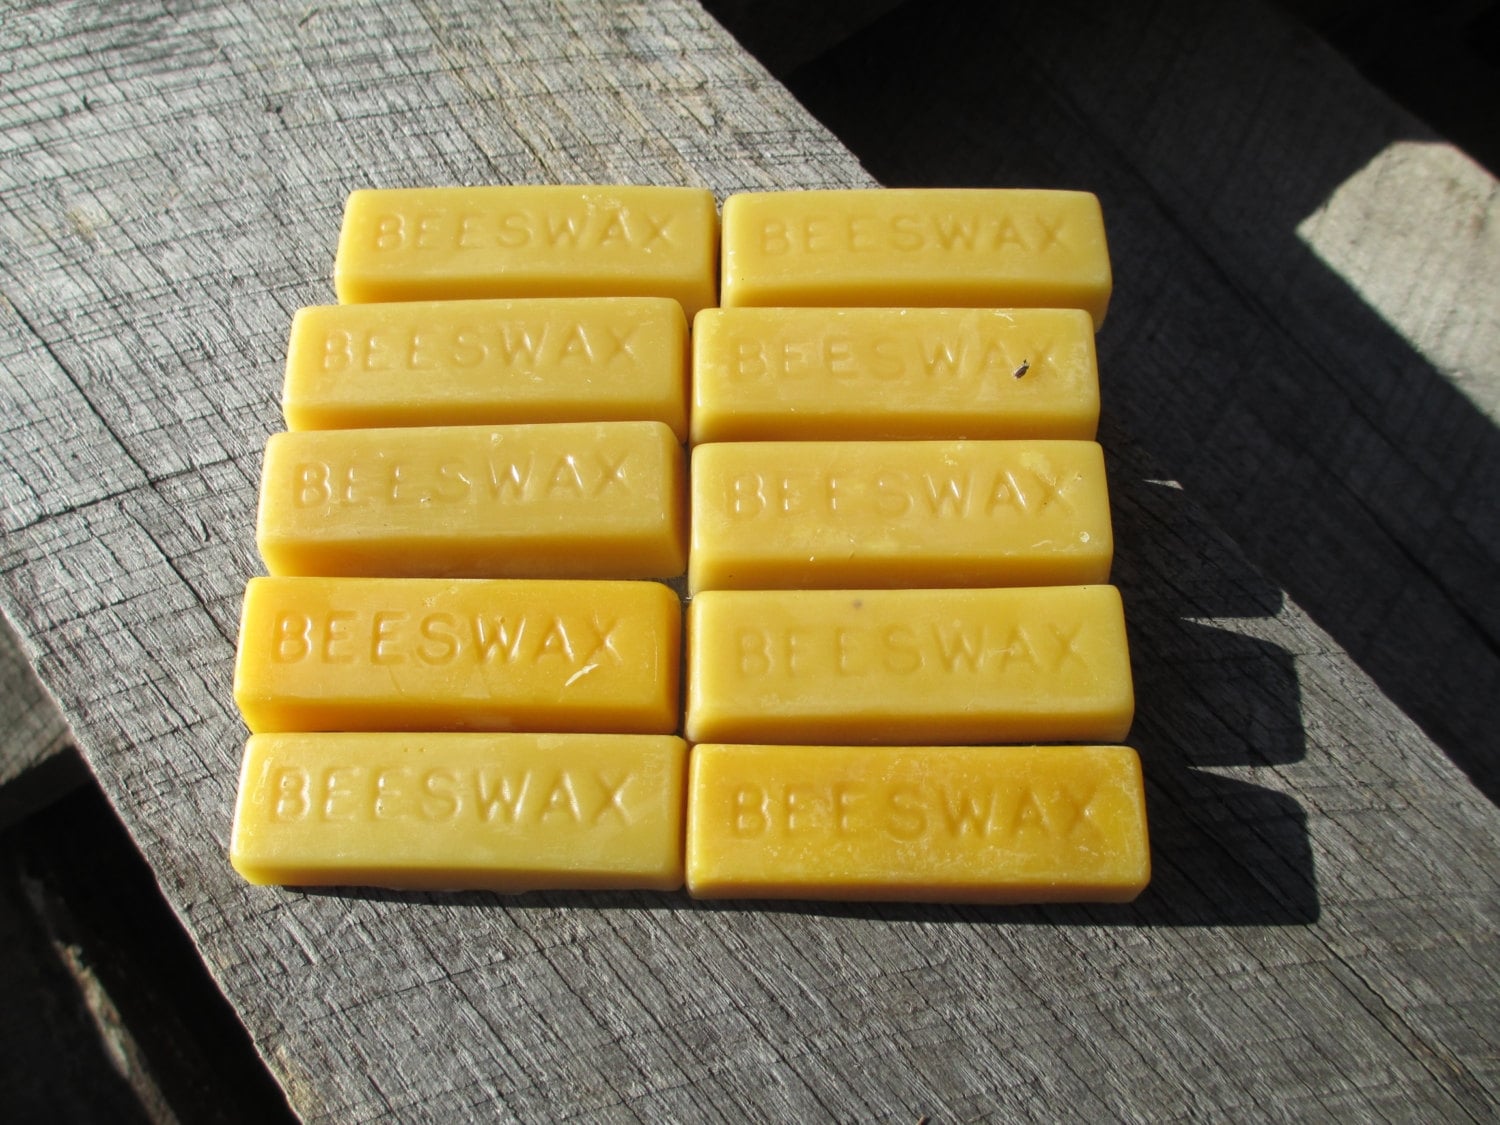 11 pounds of beeswax in 16 oz blocks- great for crafting — Honeyrun Farm